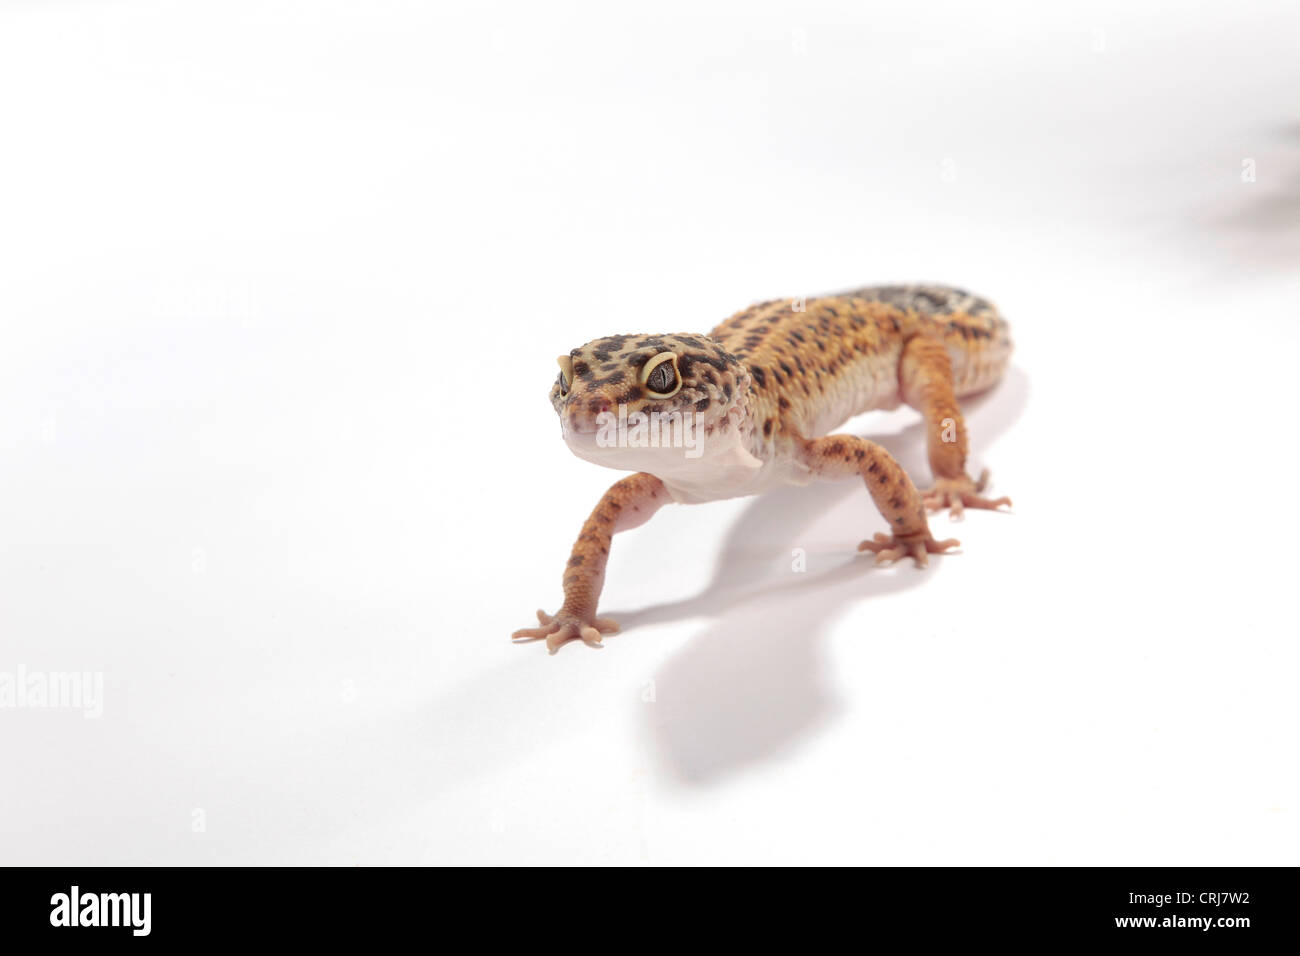 Leopard Gecko on a cut out background Stock Photo